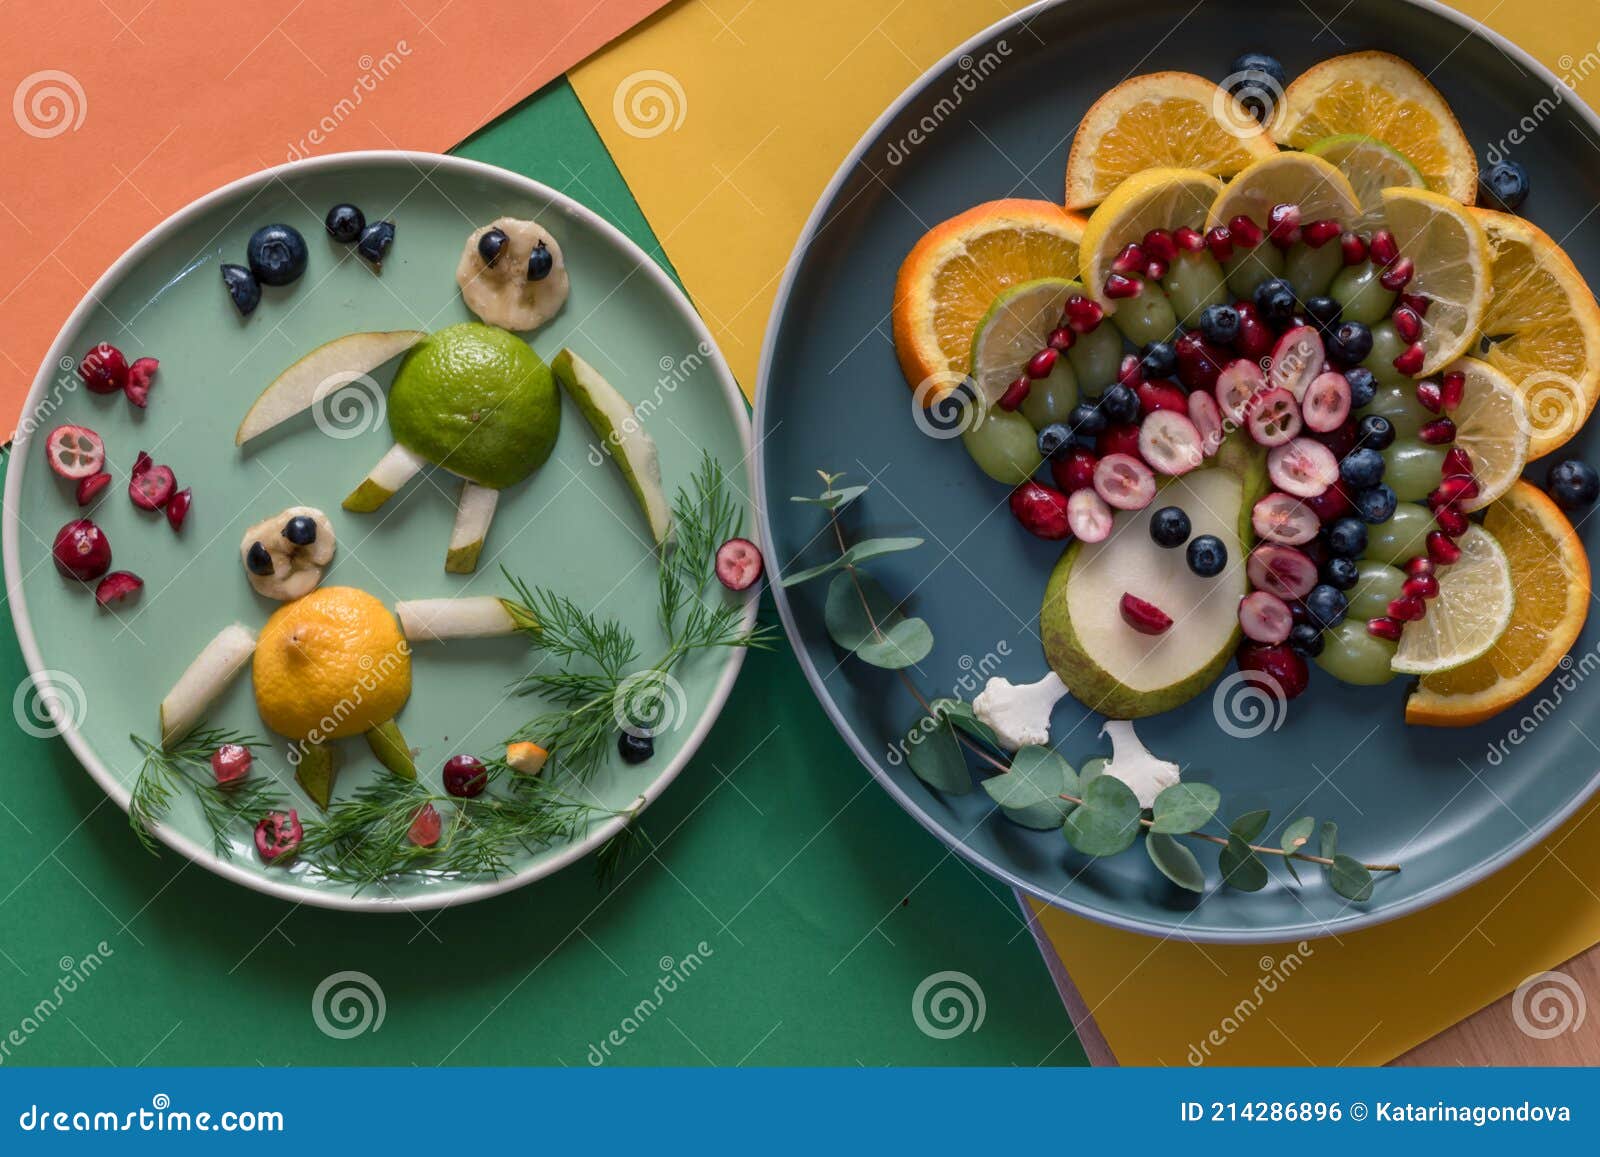 Fruits and Vegetables Decoration Ideas Kids Will Love | fruit, salad,  vegetable | Creative Ways To Get Kids To Eat Salad :) | By Activities For  Kids | Here we are using